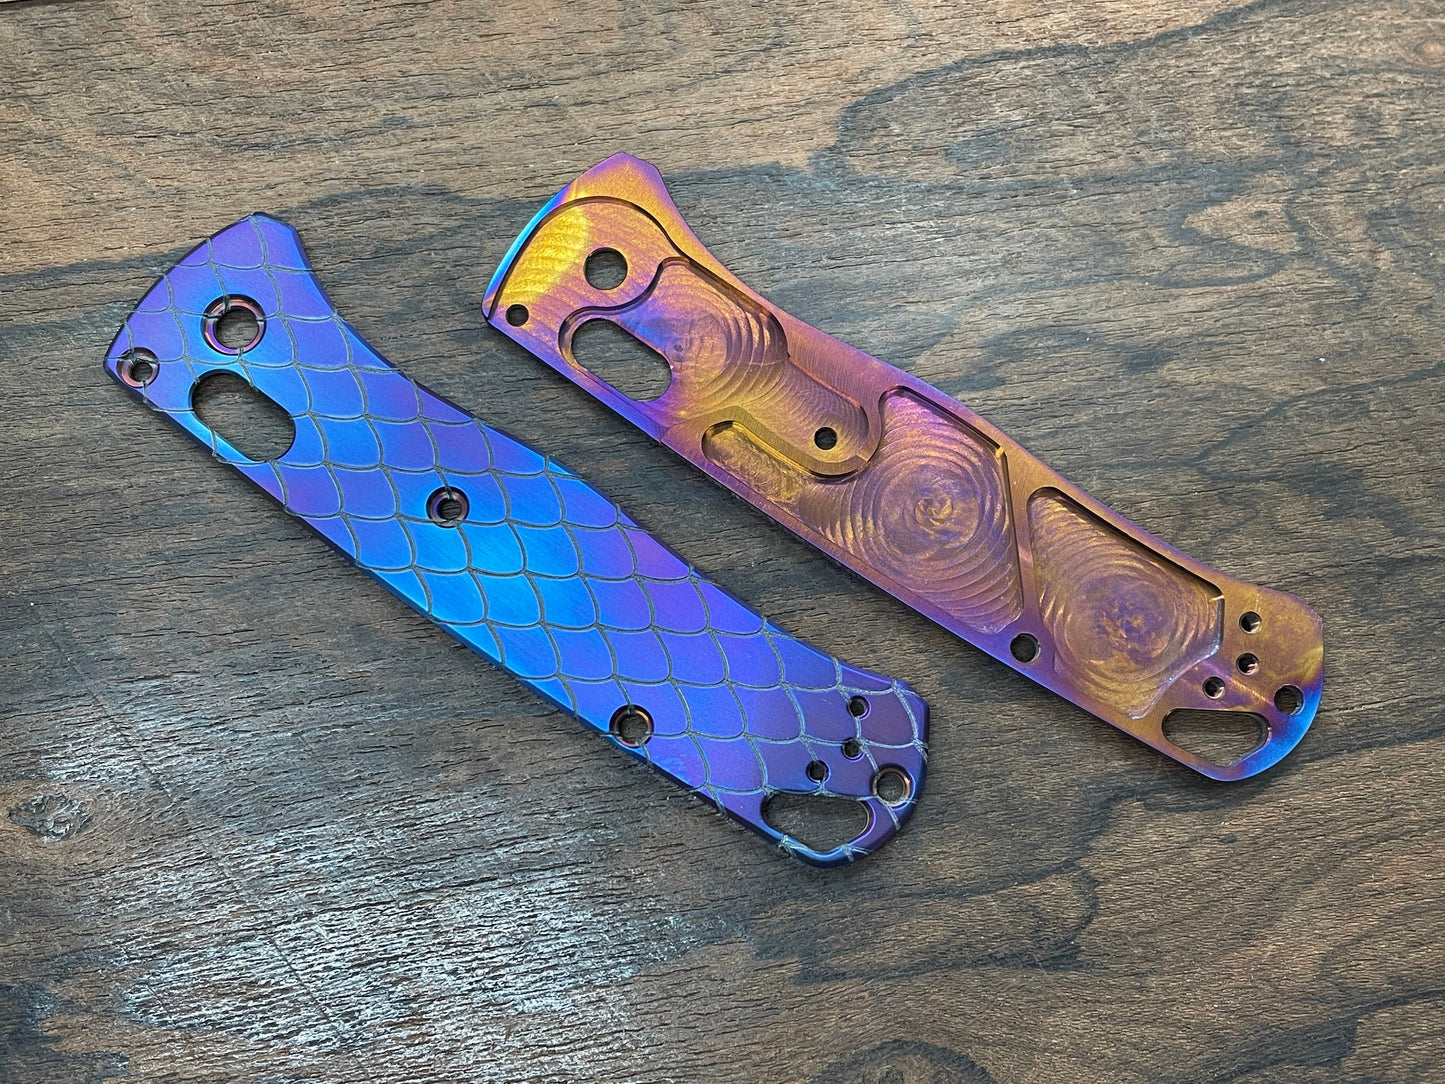 Flamed DRAGONSKIN engraved Titanium Scales for Benchmade Bugout 535